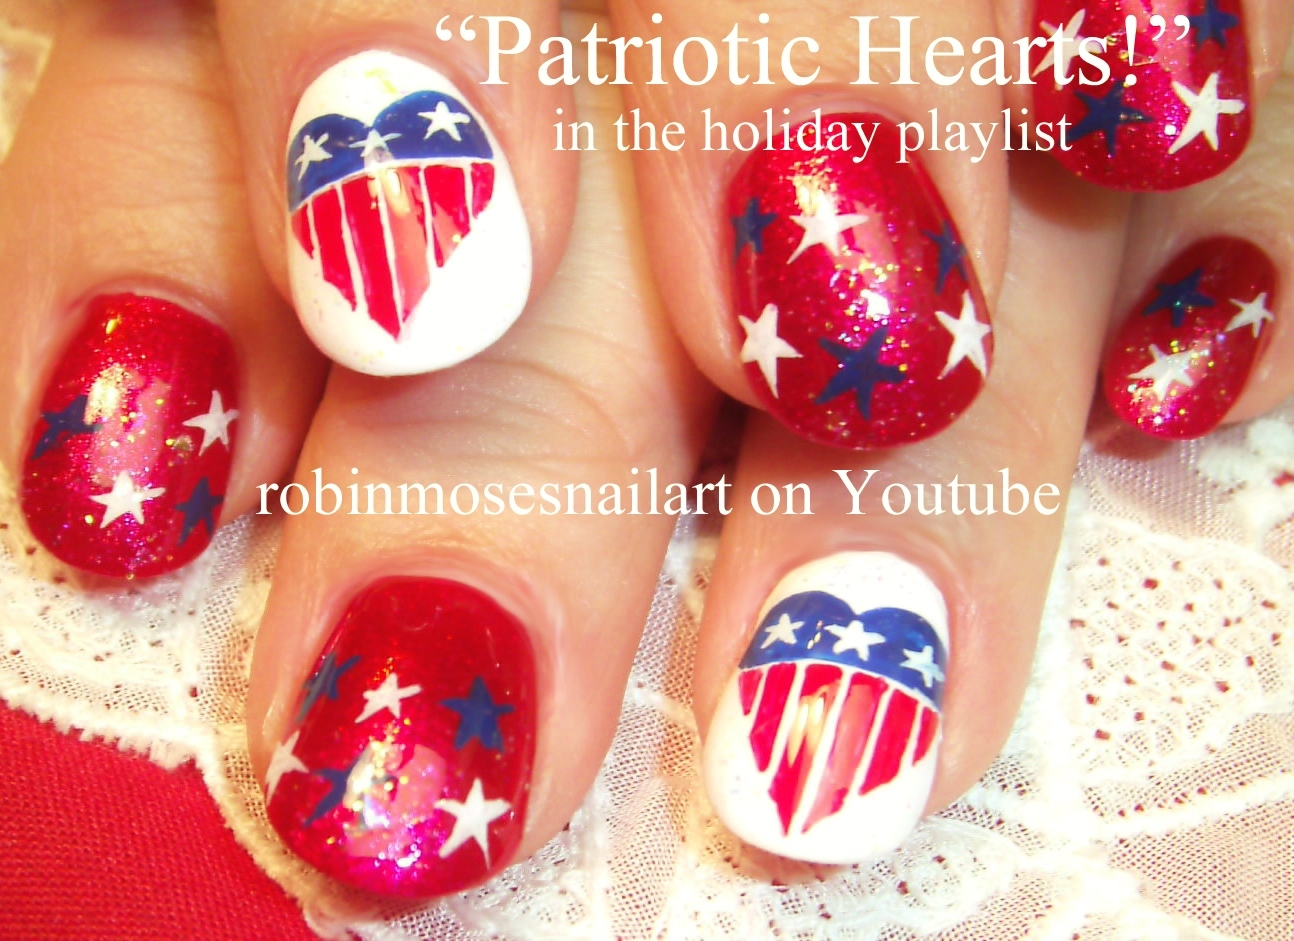 2. Patriotic Nail Designs for July 4th by Gabby - wide 10